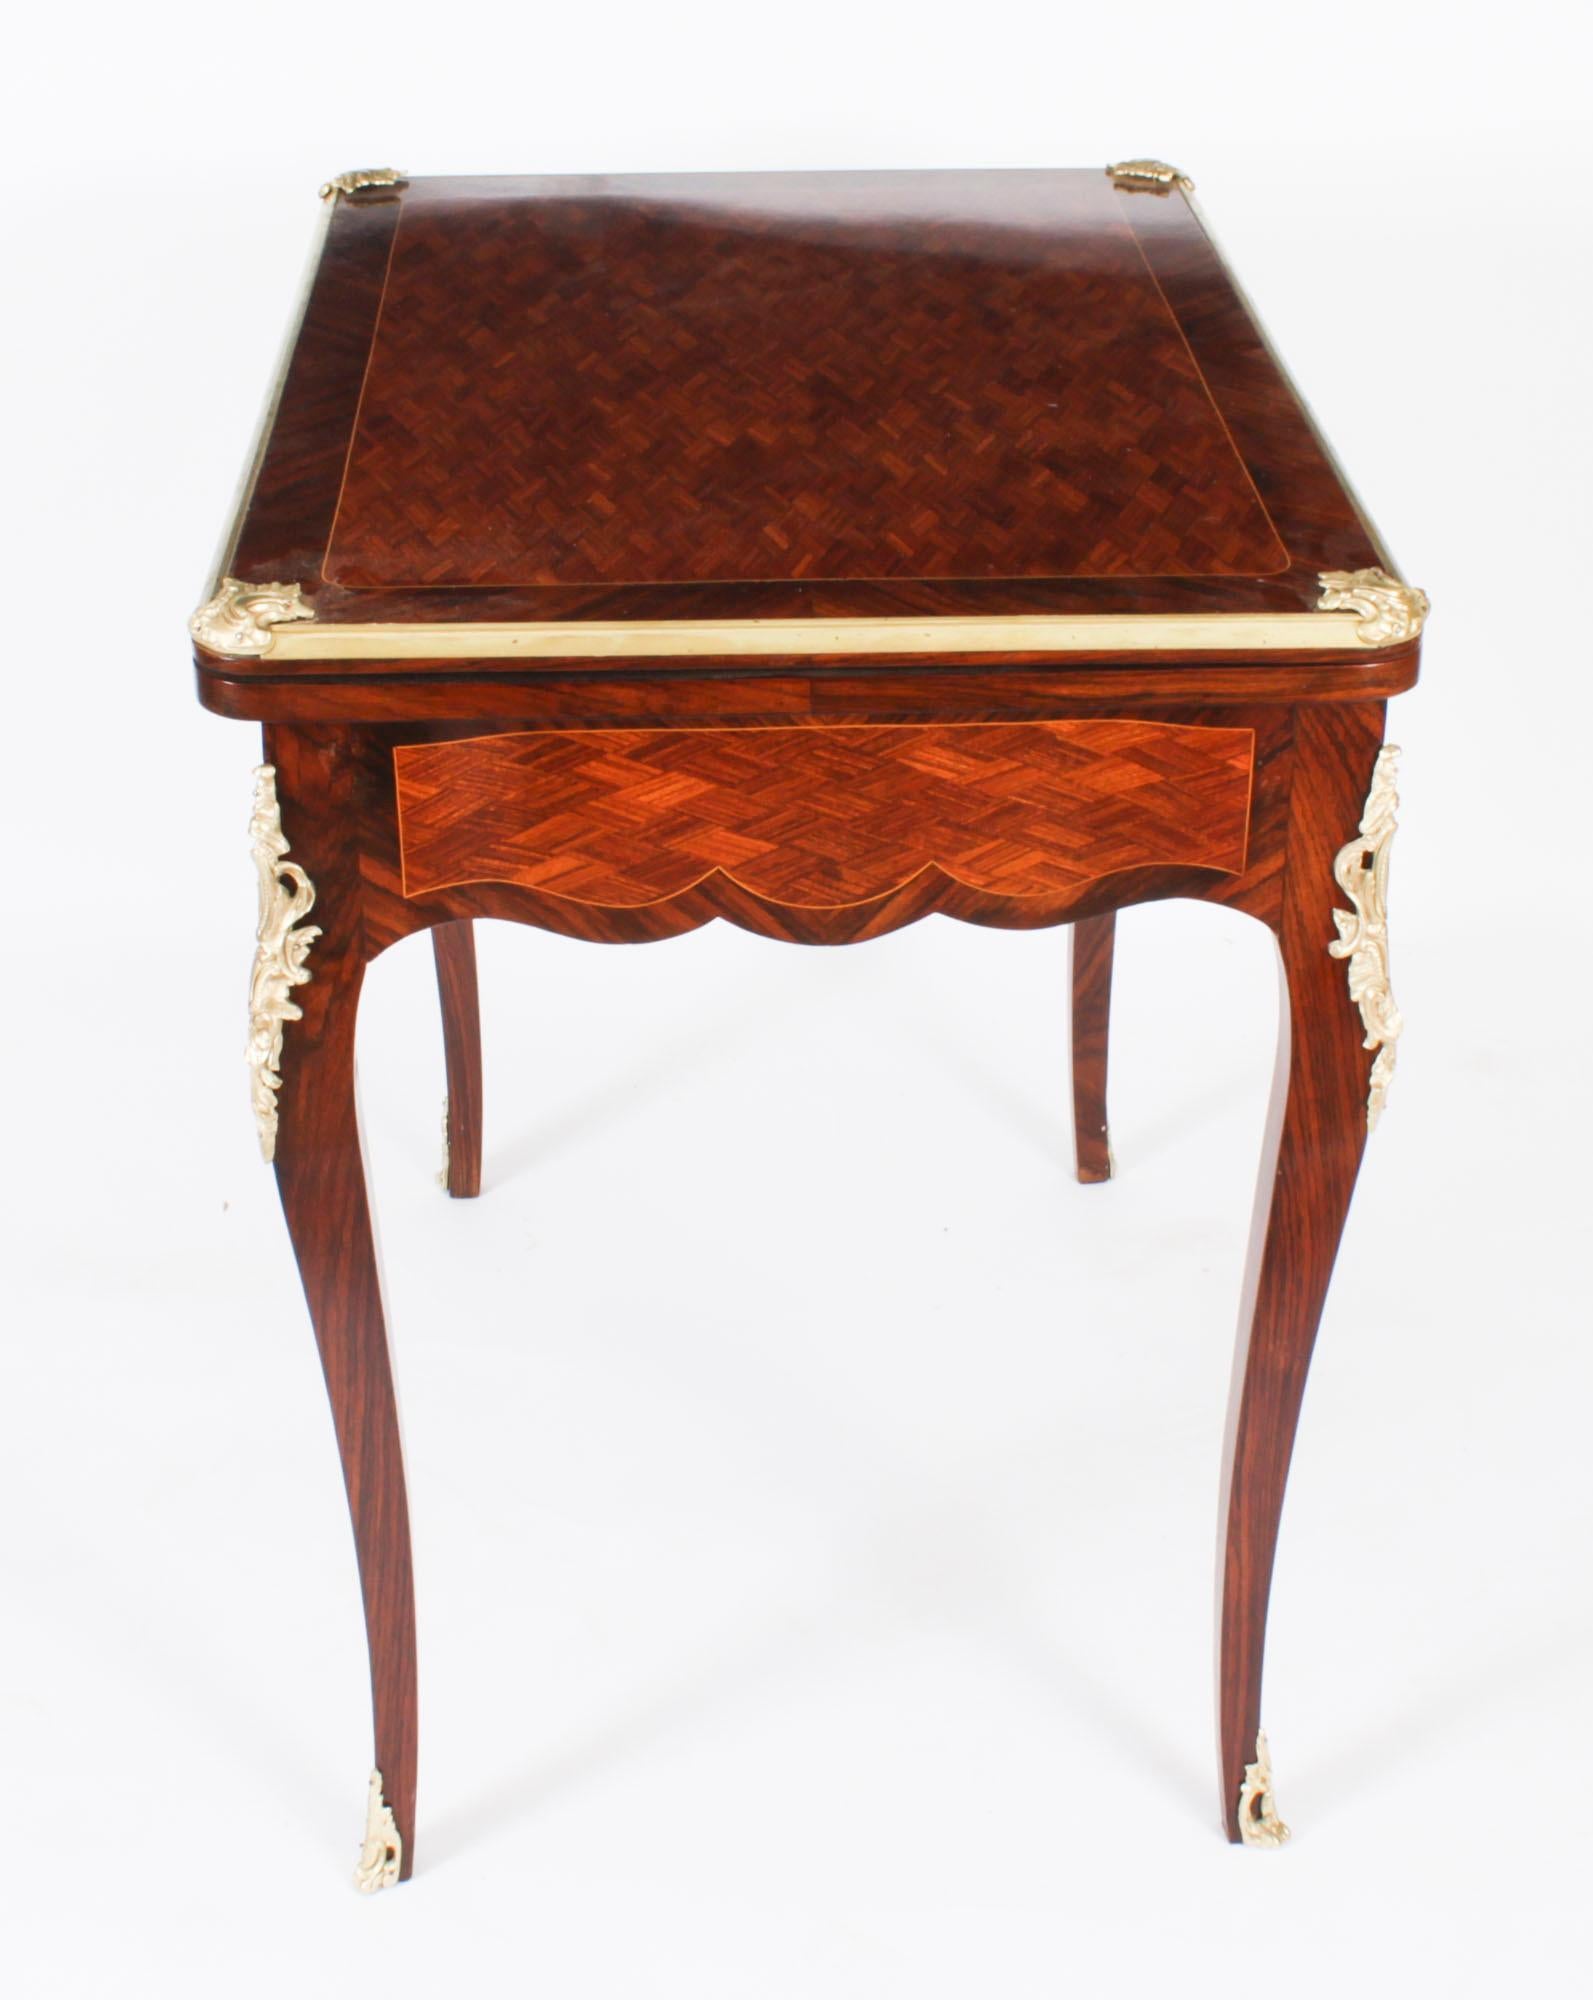 Antique French Burr Walnut Parquetry Card Backgammon Table 19th Century For Sale 6